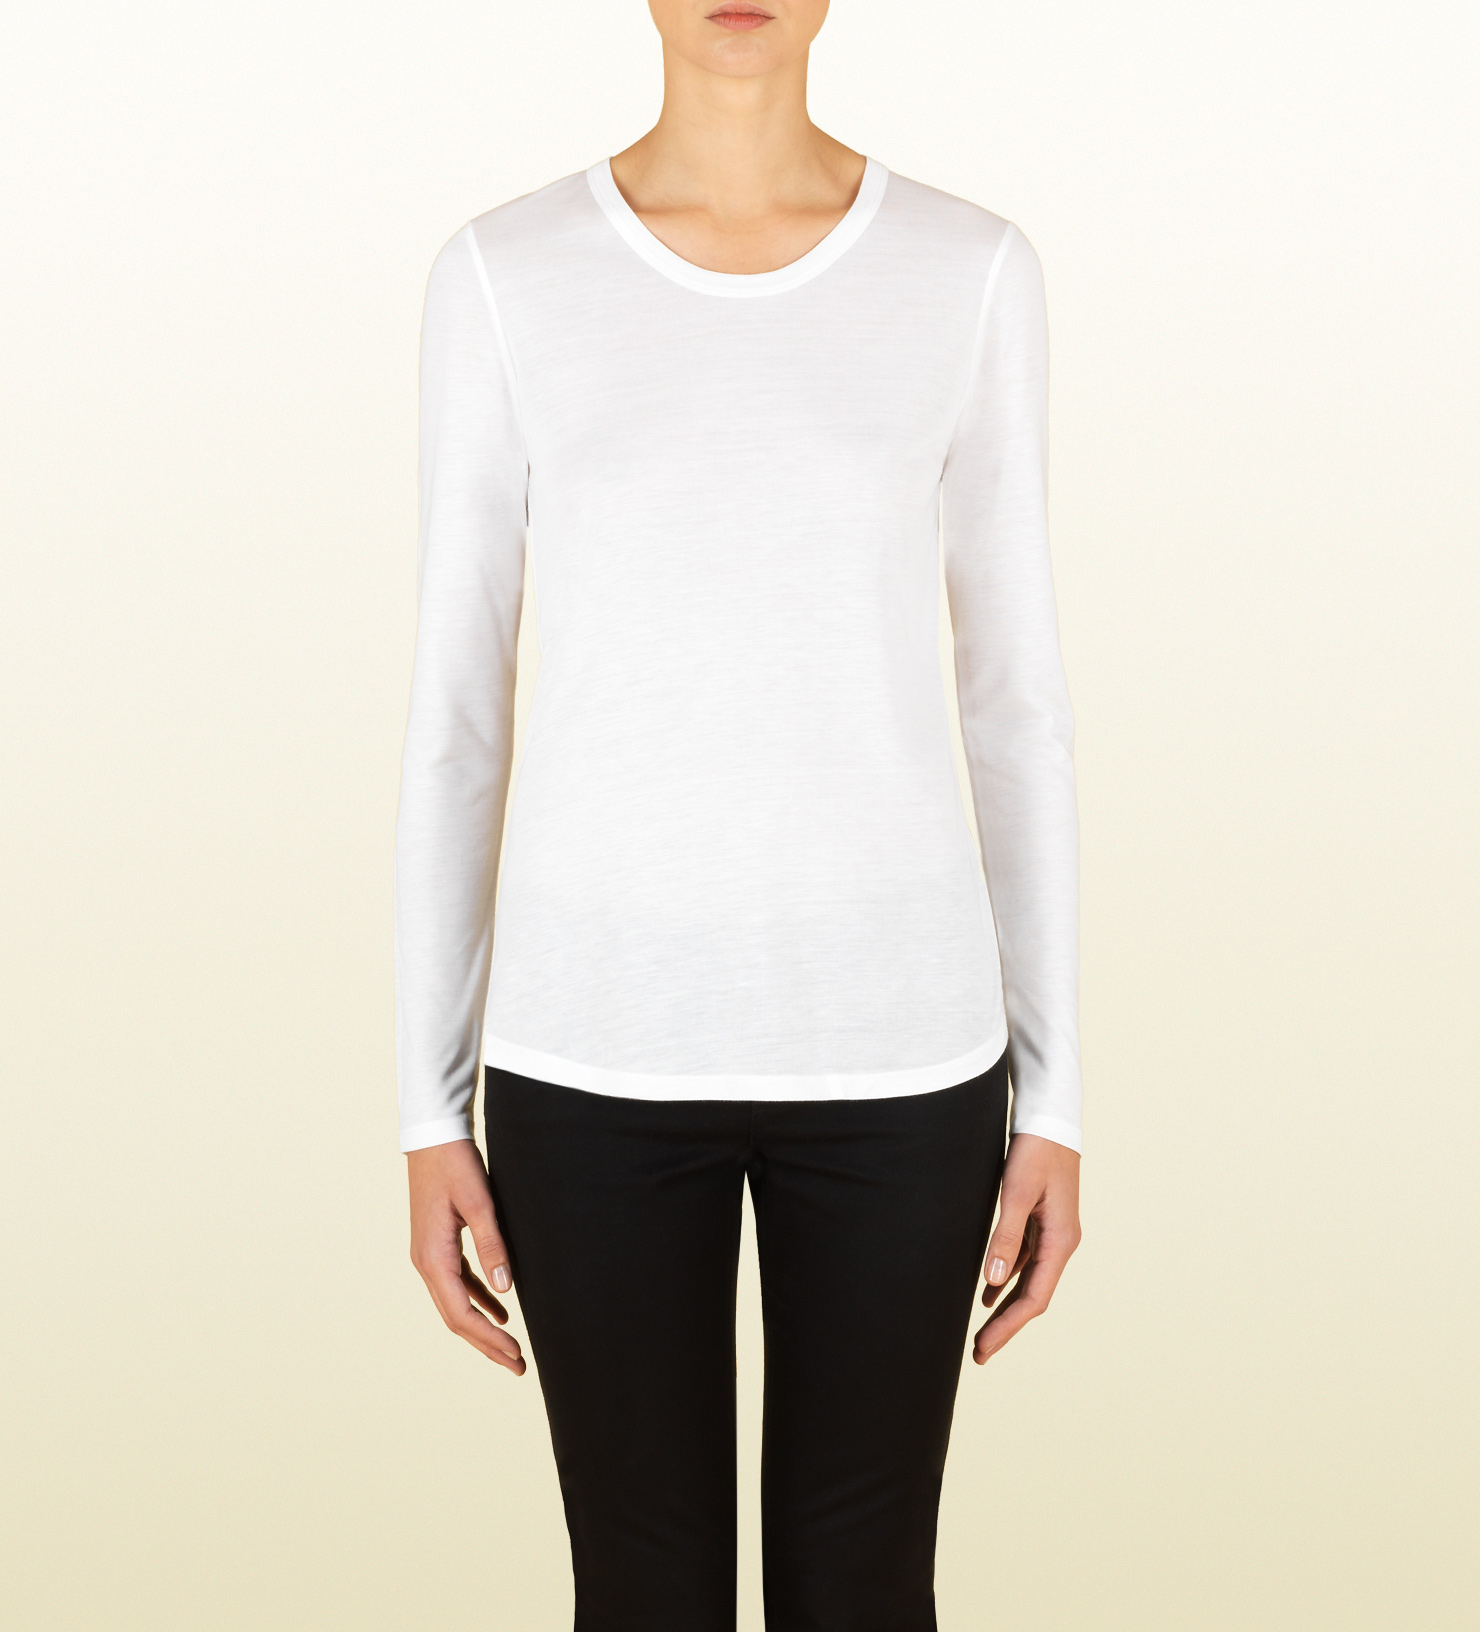 Lyst - Gucci Women's White Silk Jersey Long Sleeve T-shirt From Viaggio